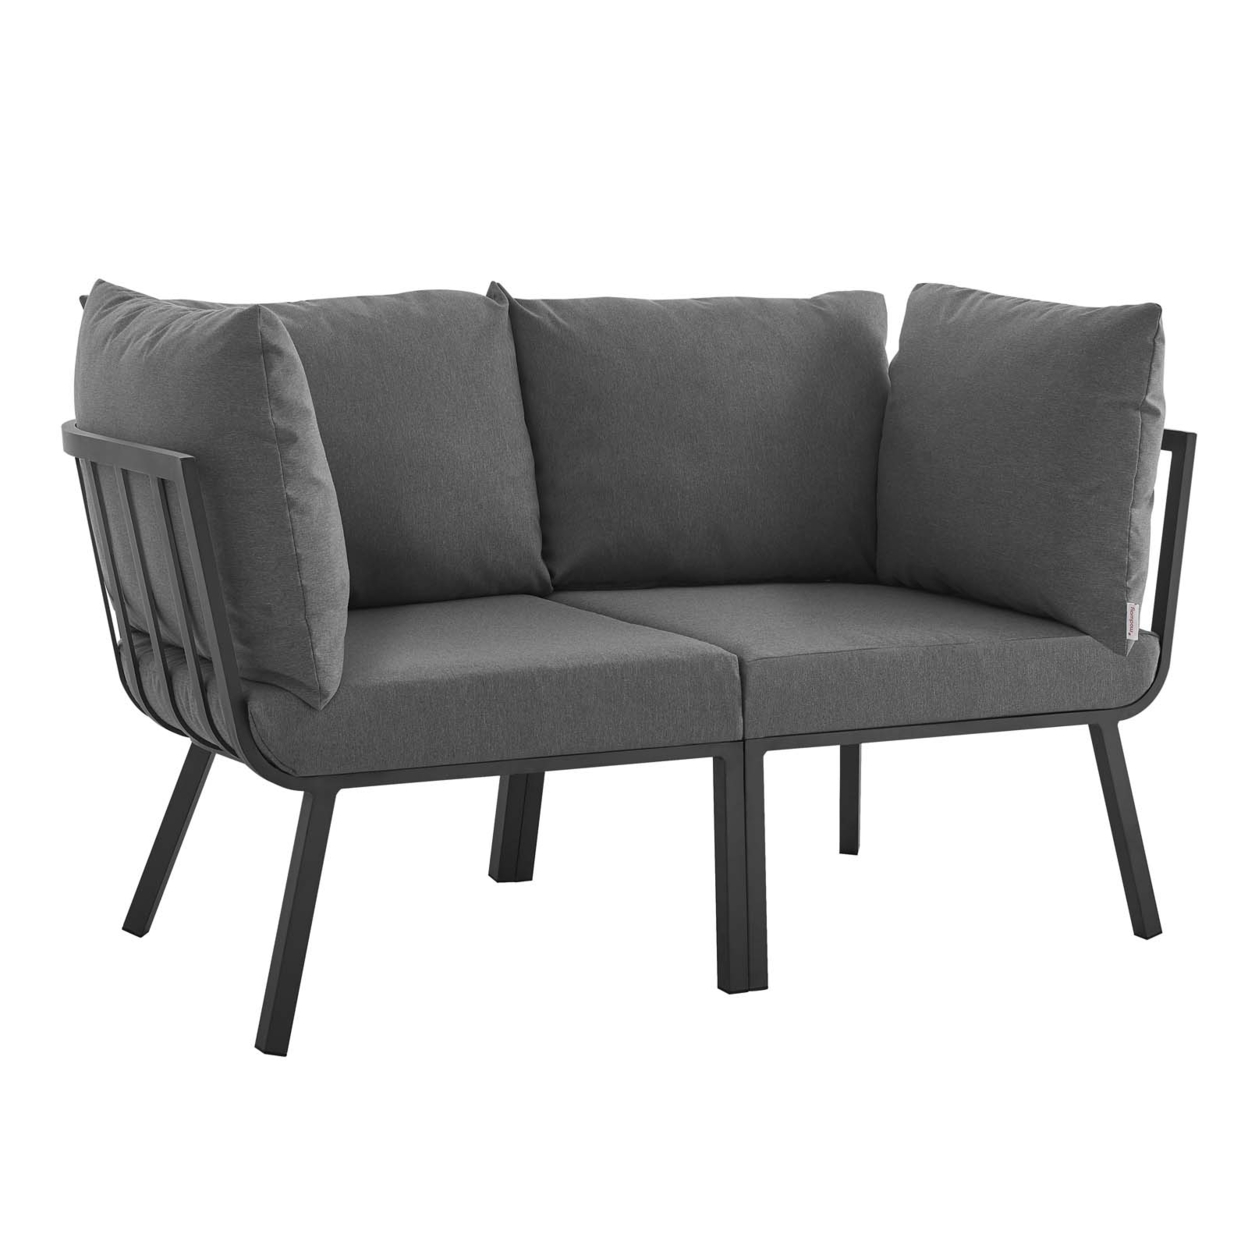 Modway Riverside 2-Piece Outdoor Aluminum Sectional Sofa Set in Gray/Charcoal - image 1 of 7